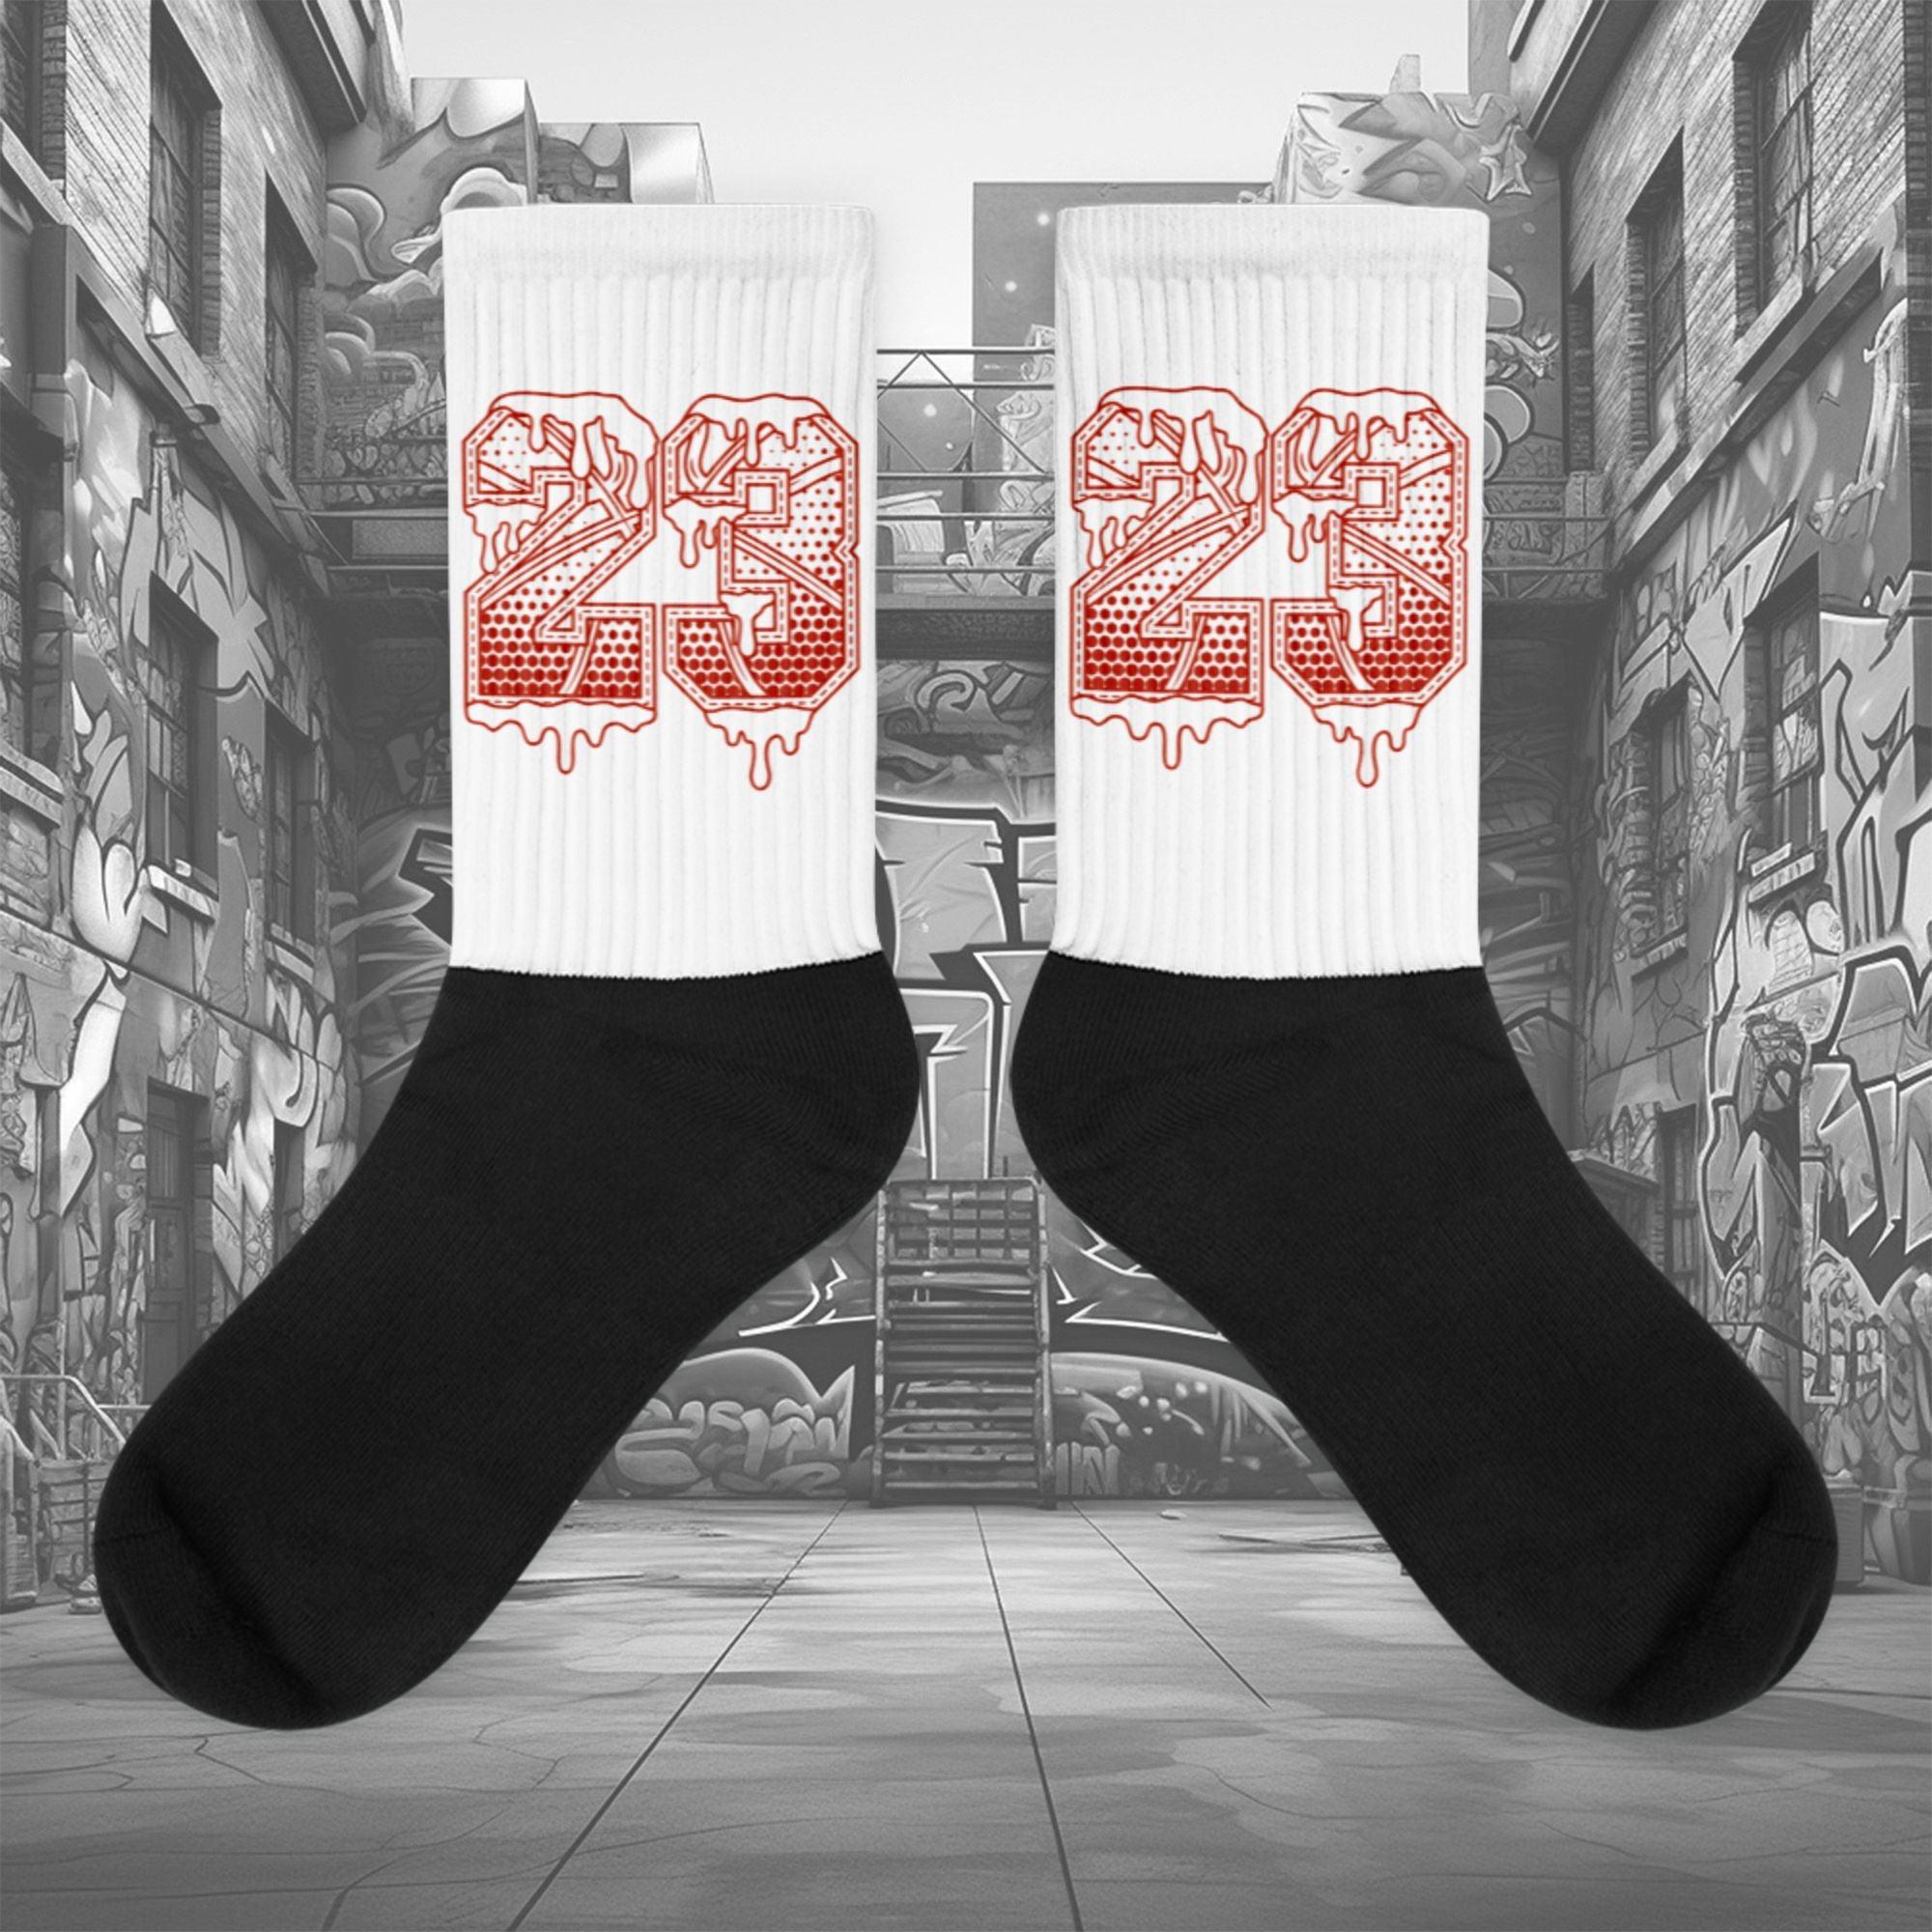  Showcases the view of the socks, highlighting the vibrant ' 23 Ball ' design, which perfectly complements the Air Jordan 11 Cherry sneakers. The intricate pattern and color scheme inspired by the  theme are prominently displayed.  Focusing on the ribbed leg , cusioned bottoms and the snug fit of the socks. This angle provides a clear view of the texture and quality of the material blend